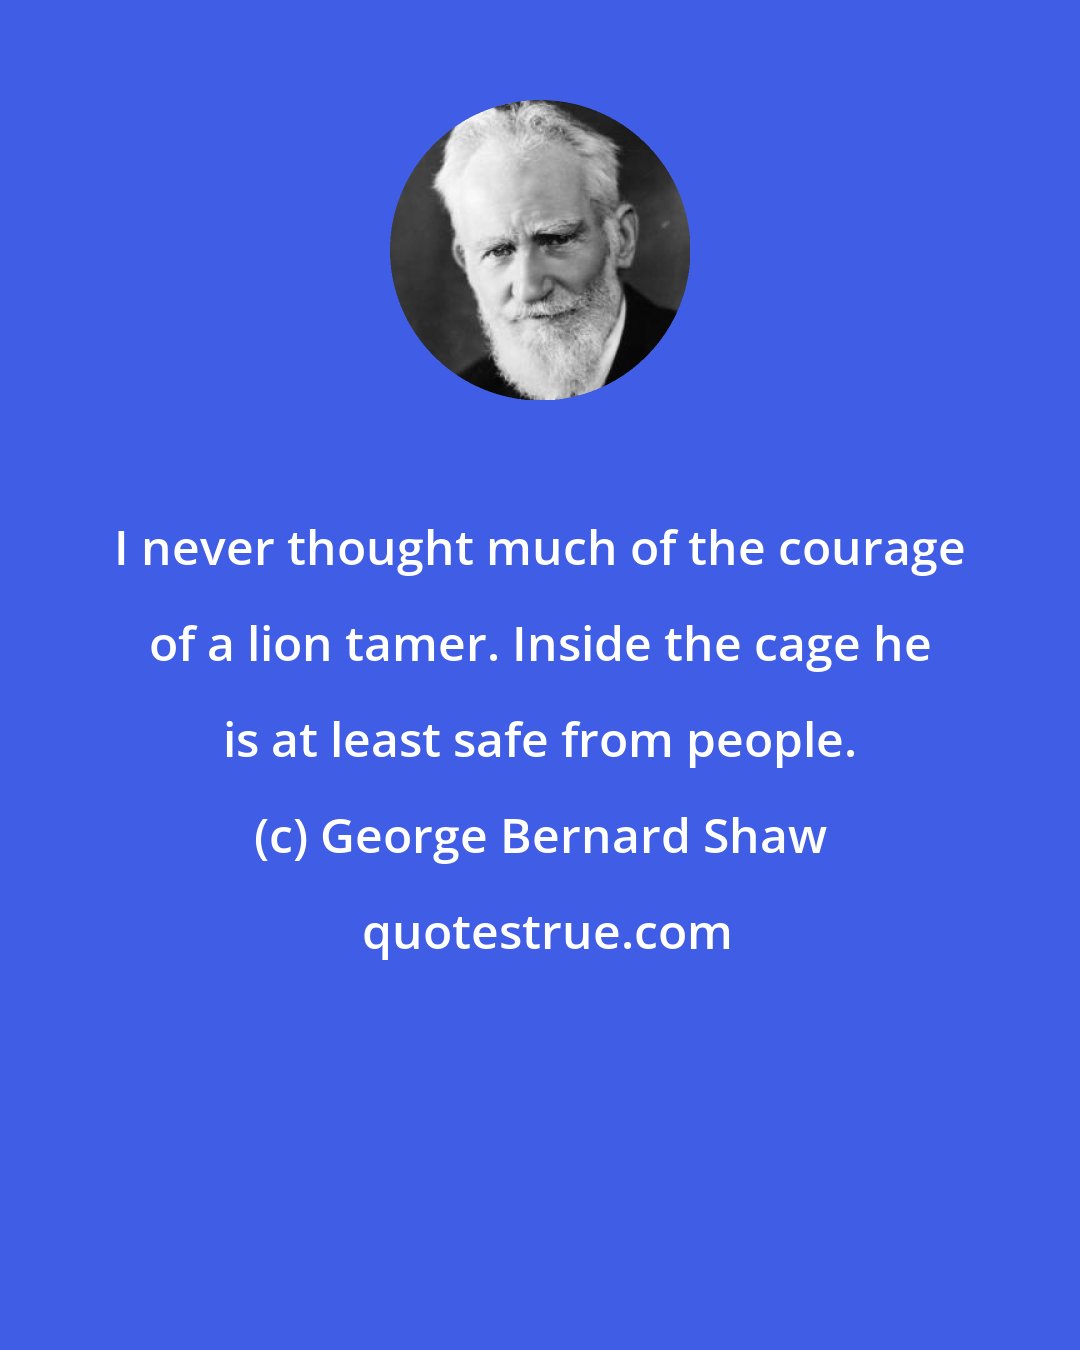 George Bernard Shaw: I never thought much of the courage of a lion tamer. Inside the cage he is at least safe from people.